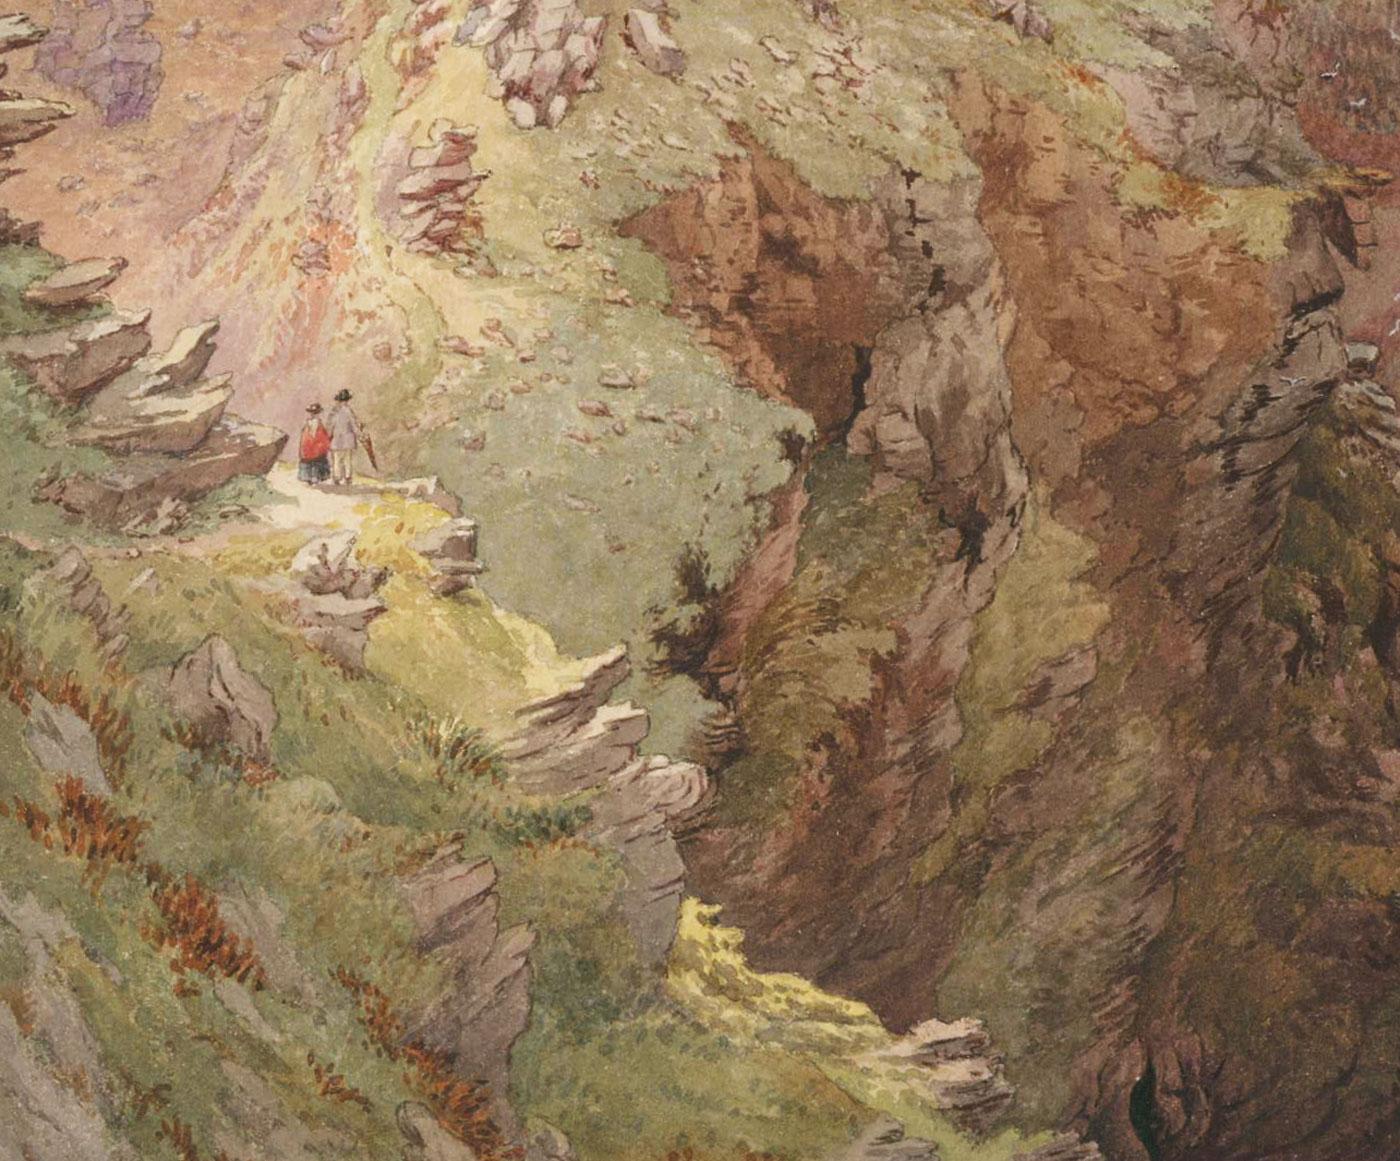 L. Drayton - 19th Century Watercolour, Castle Rock, Lynmouth - Abstract Expressionist Art by Unknown